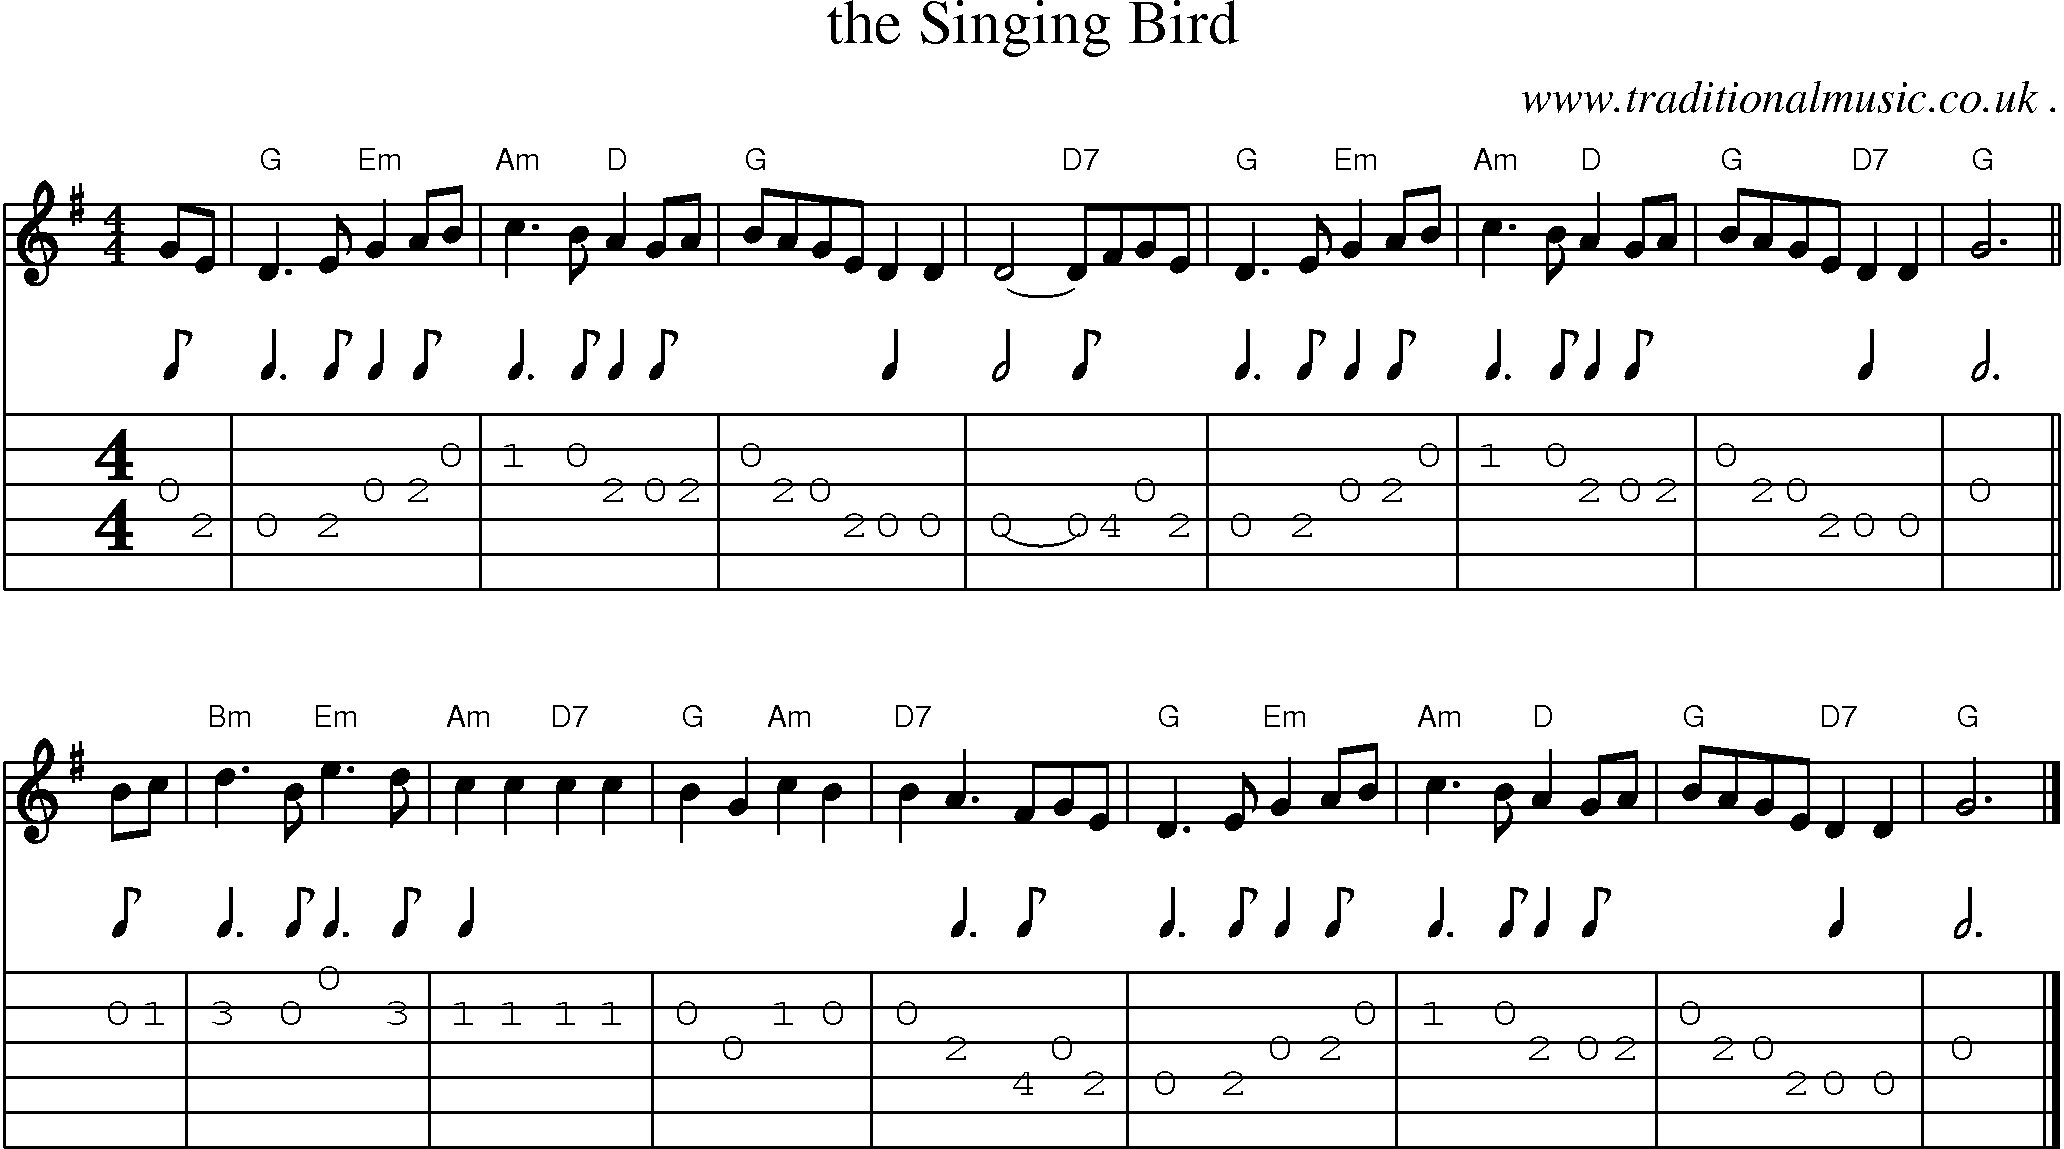 Sheet-music  score, Chords and Guitar Tabs for The Singing Bird